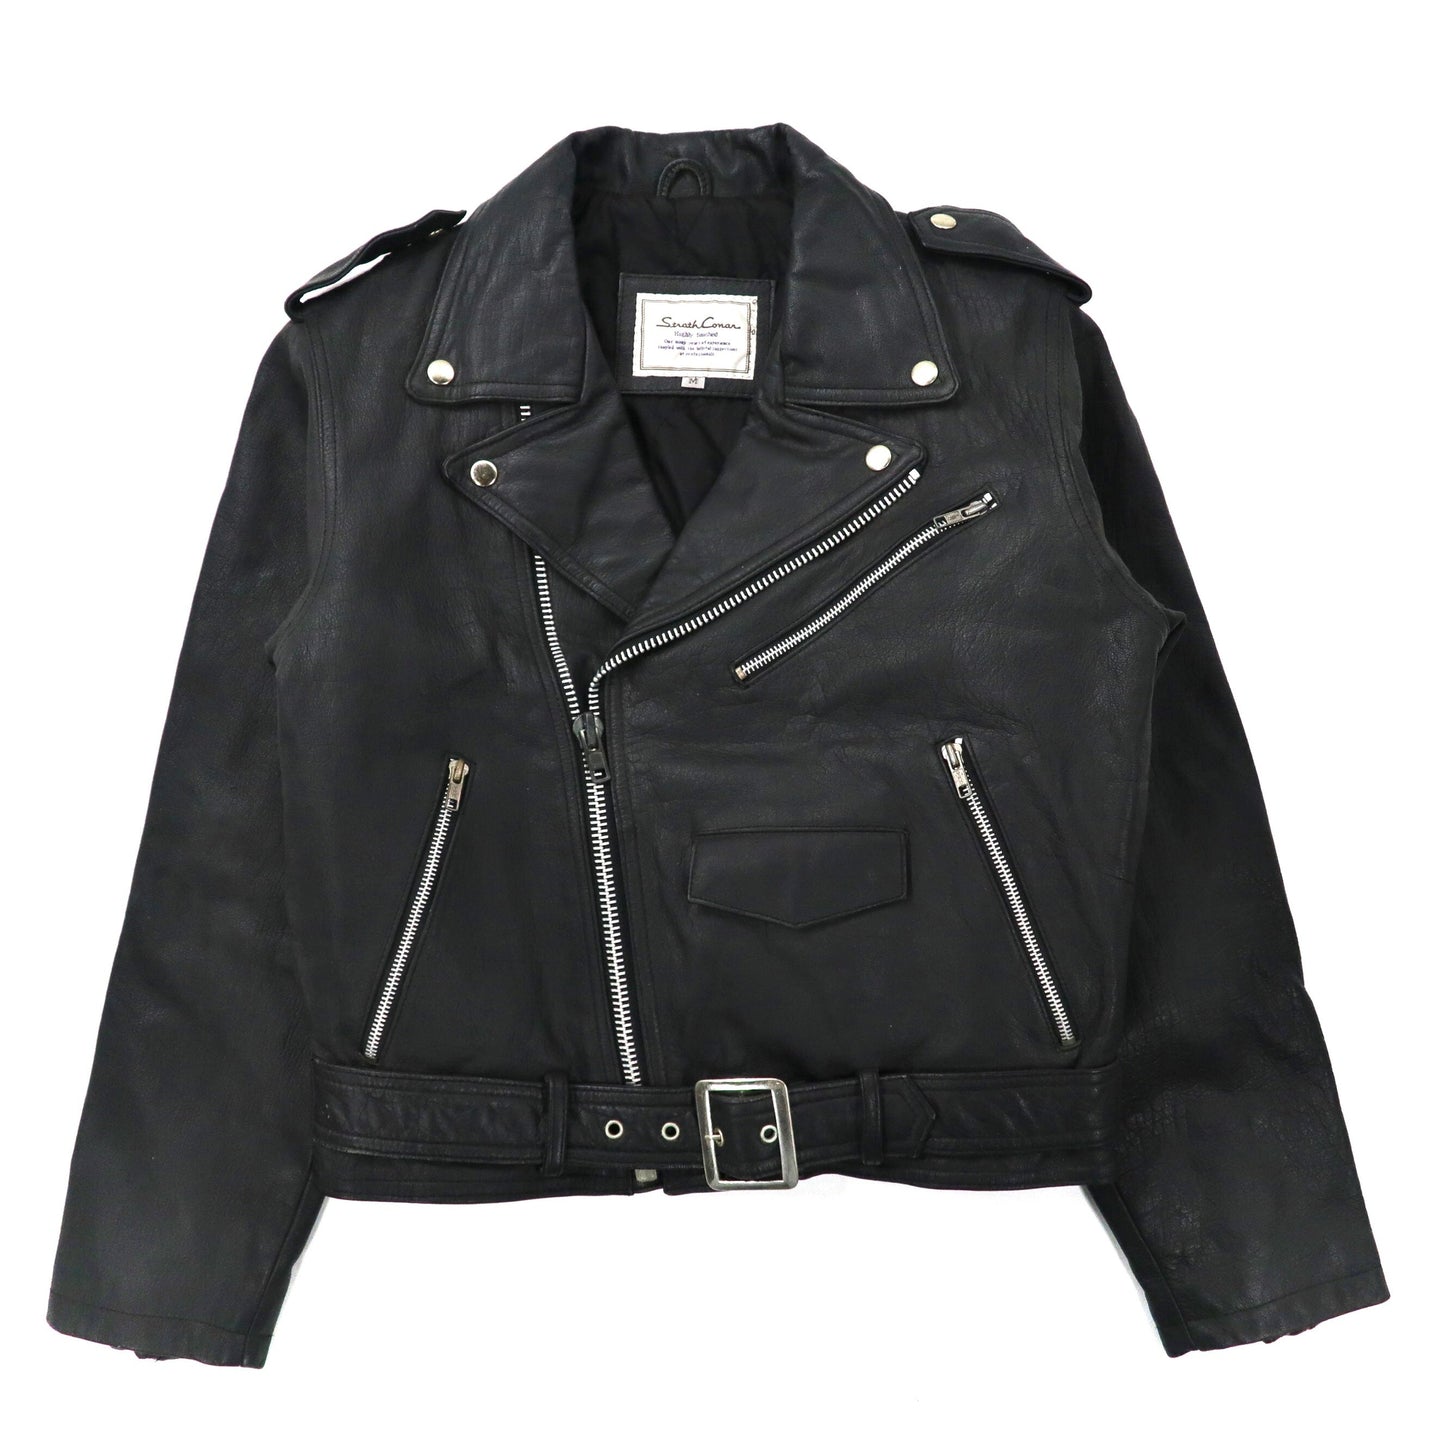 COWHIDE LEATHER W RIDERS JACKET Double Riders Jacket M Black Cow